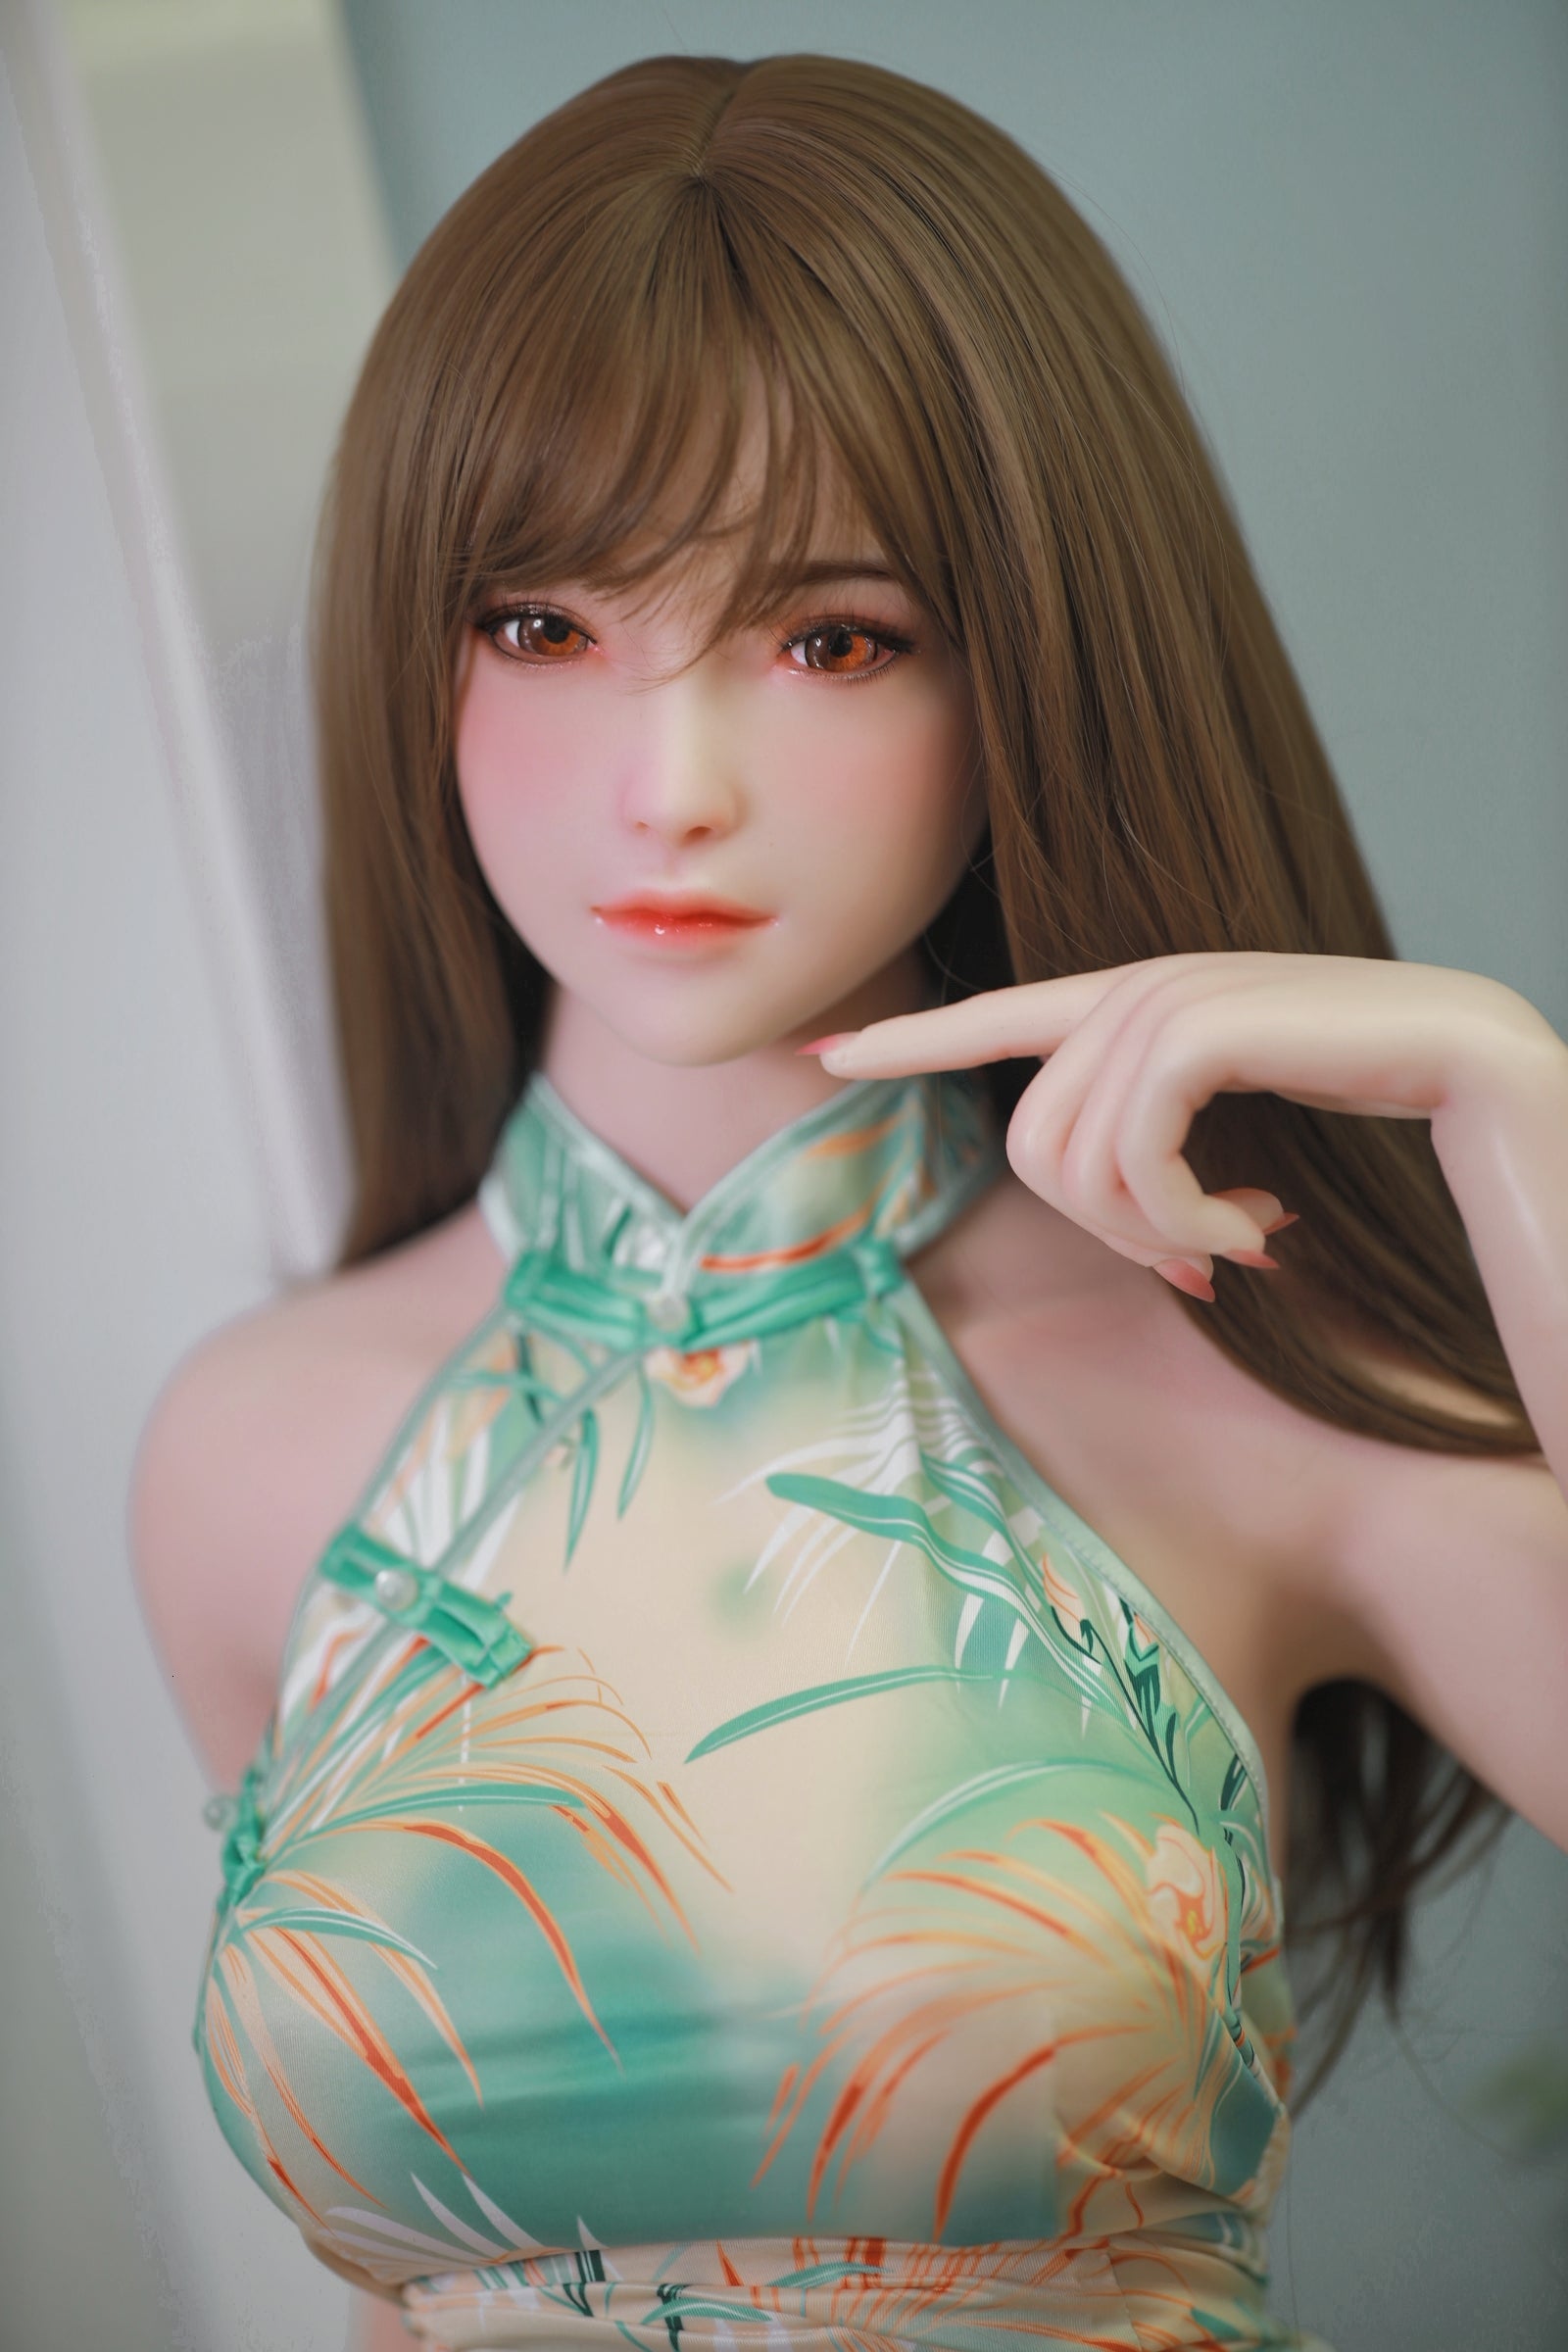 JY Doll 168 cm Silicone - Peach | Buy Sex Dolls at DOLLS ACTUALLY